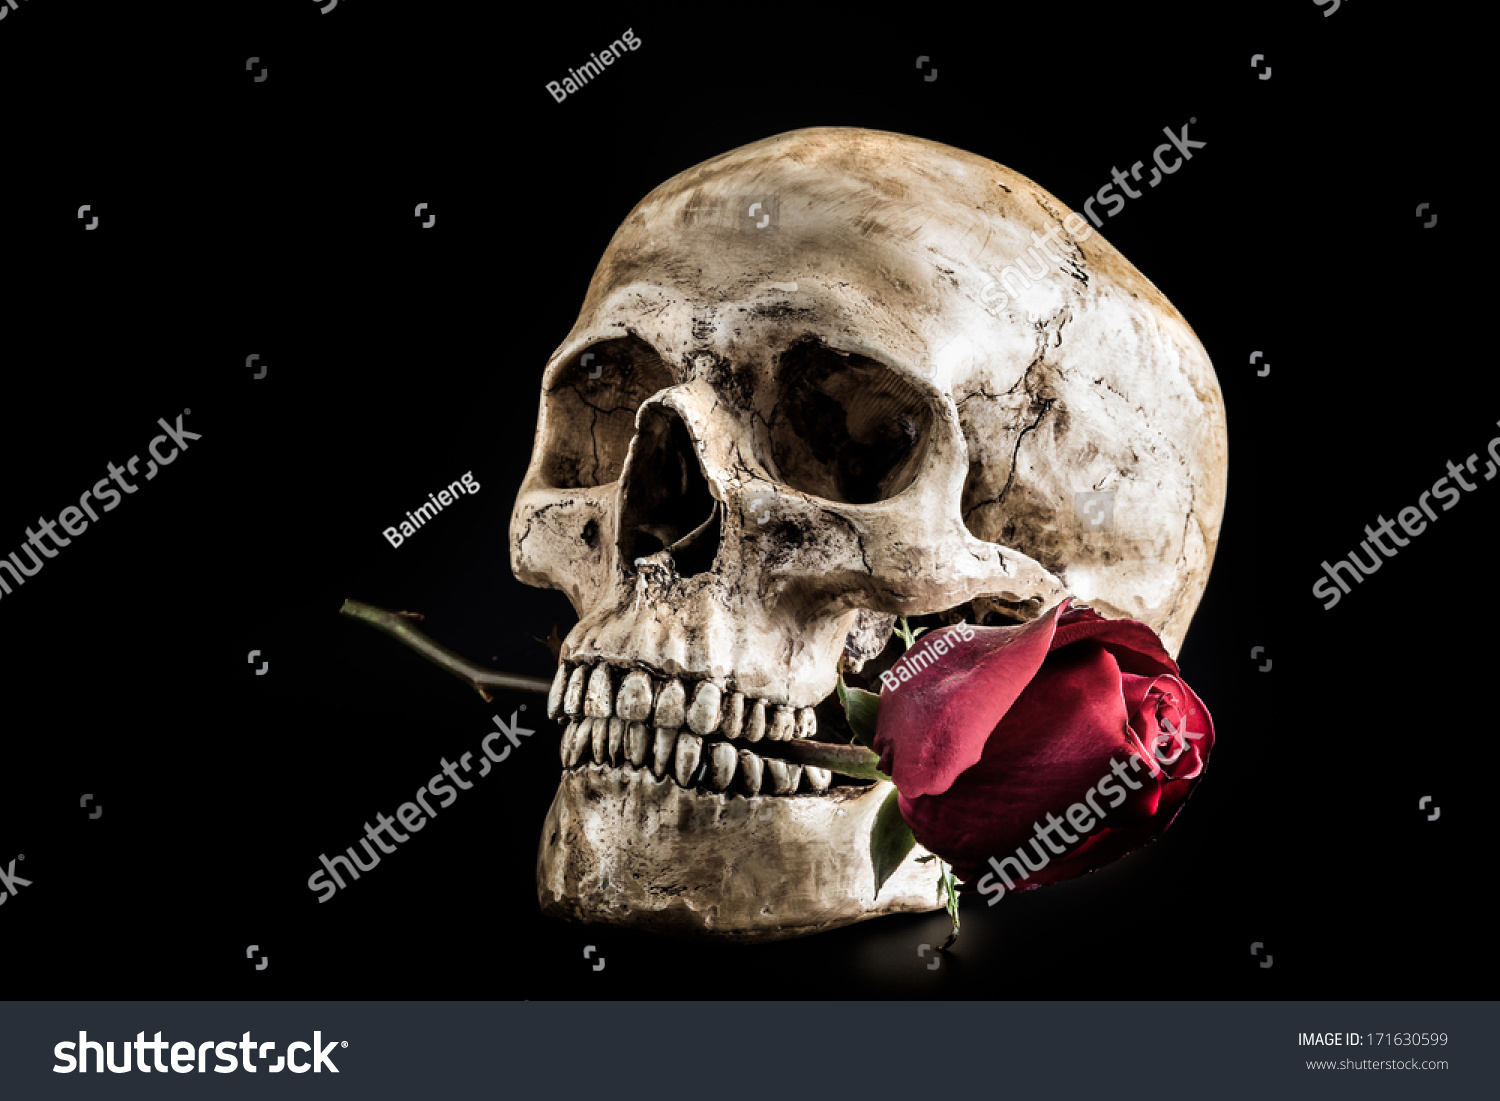 Still life with human skull with red rose in the mouth #171630599